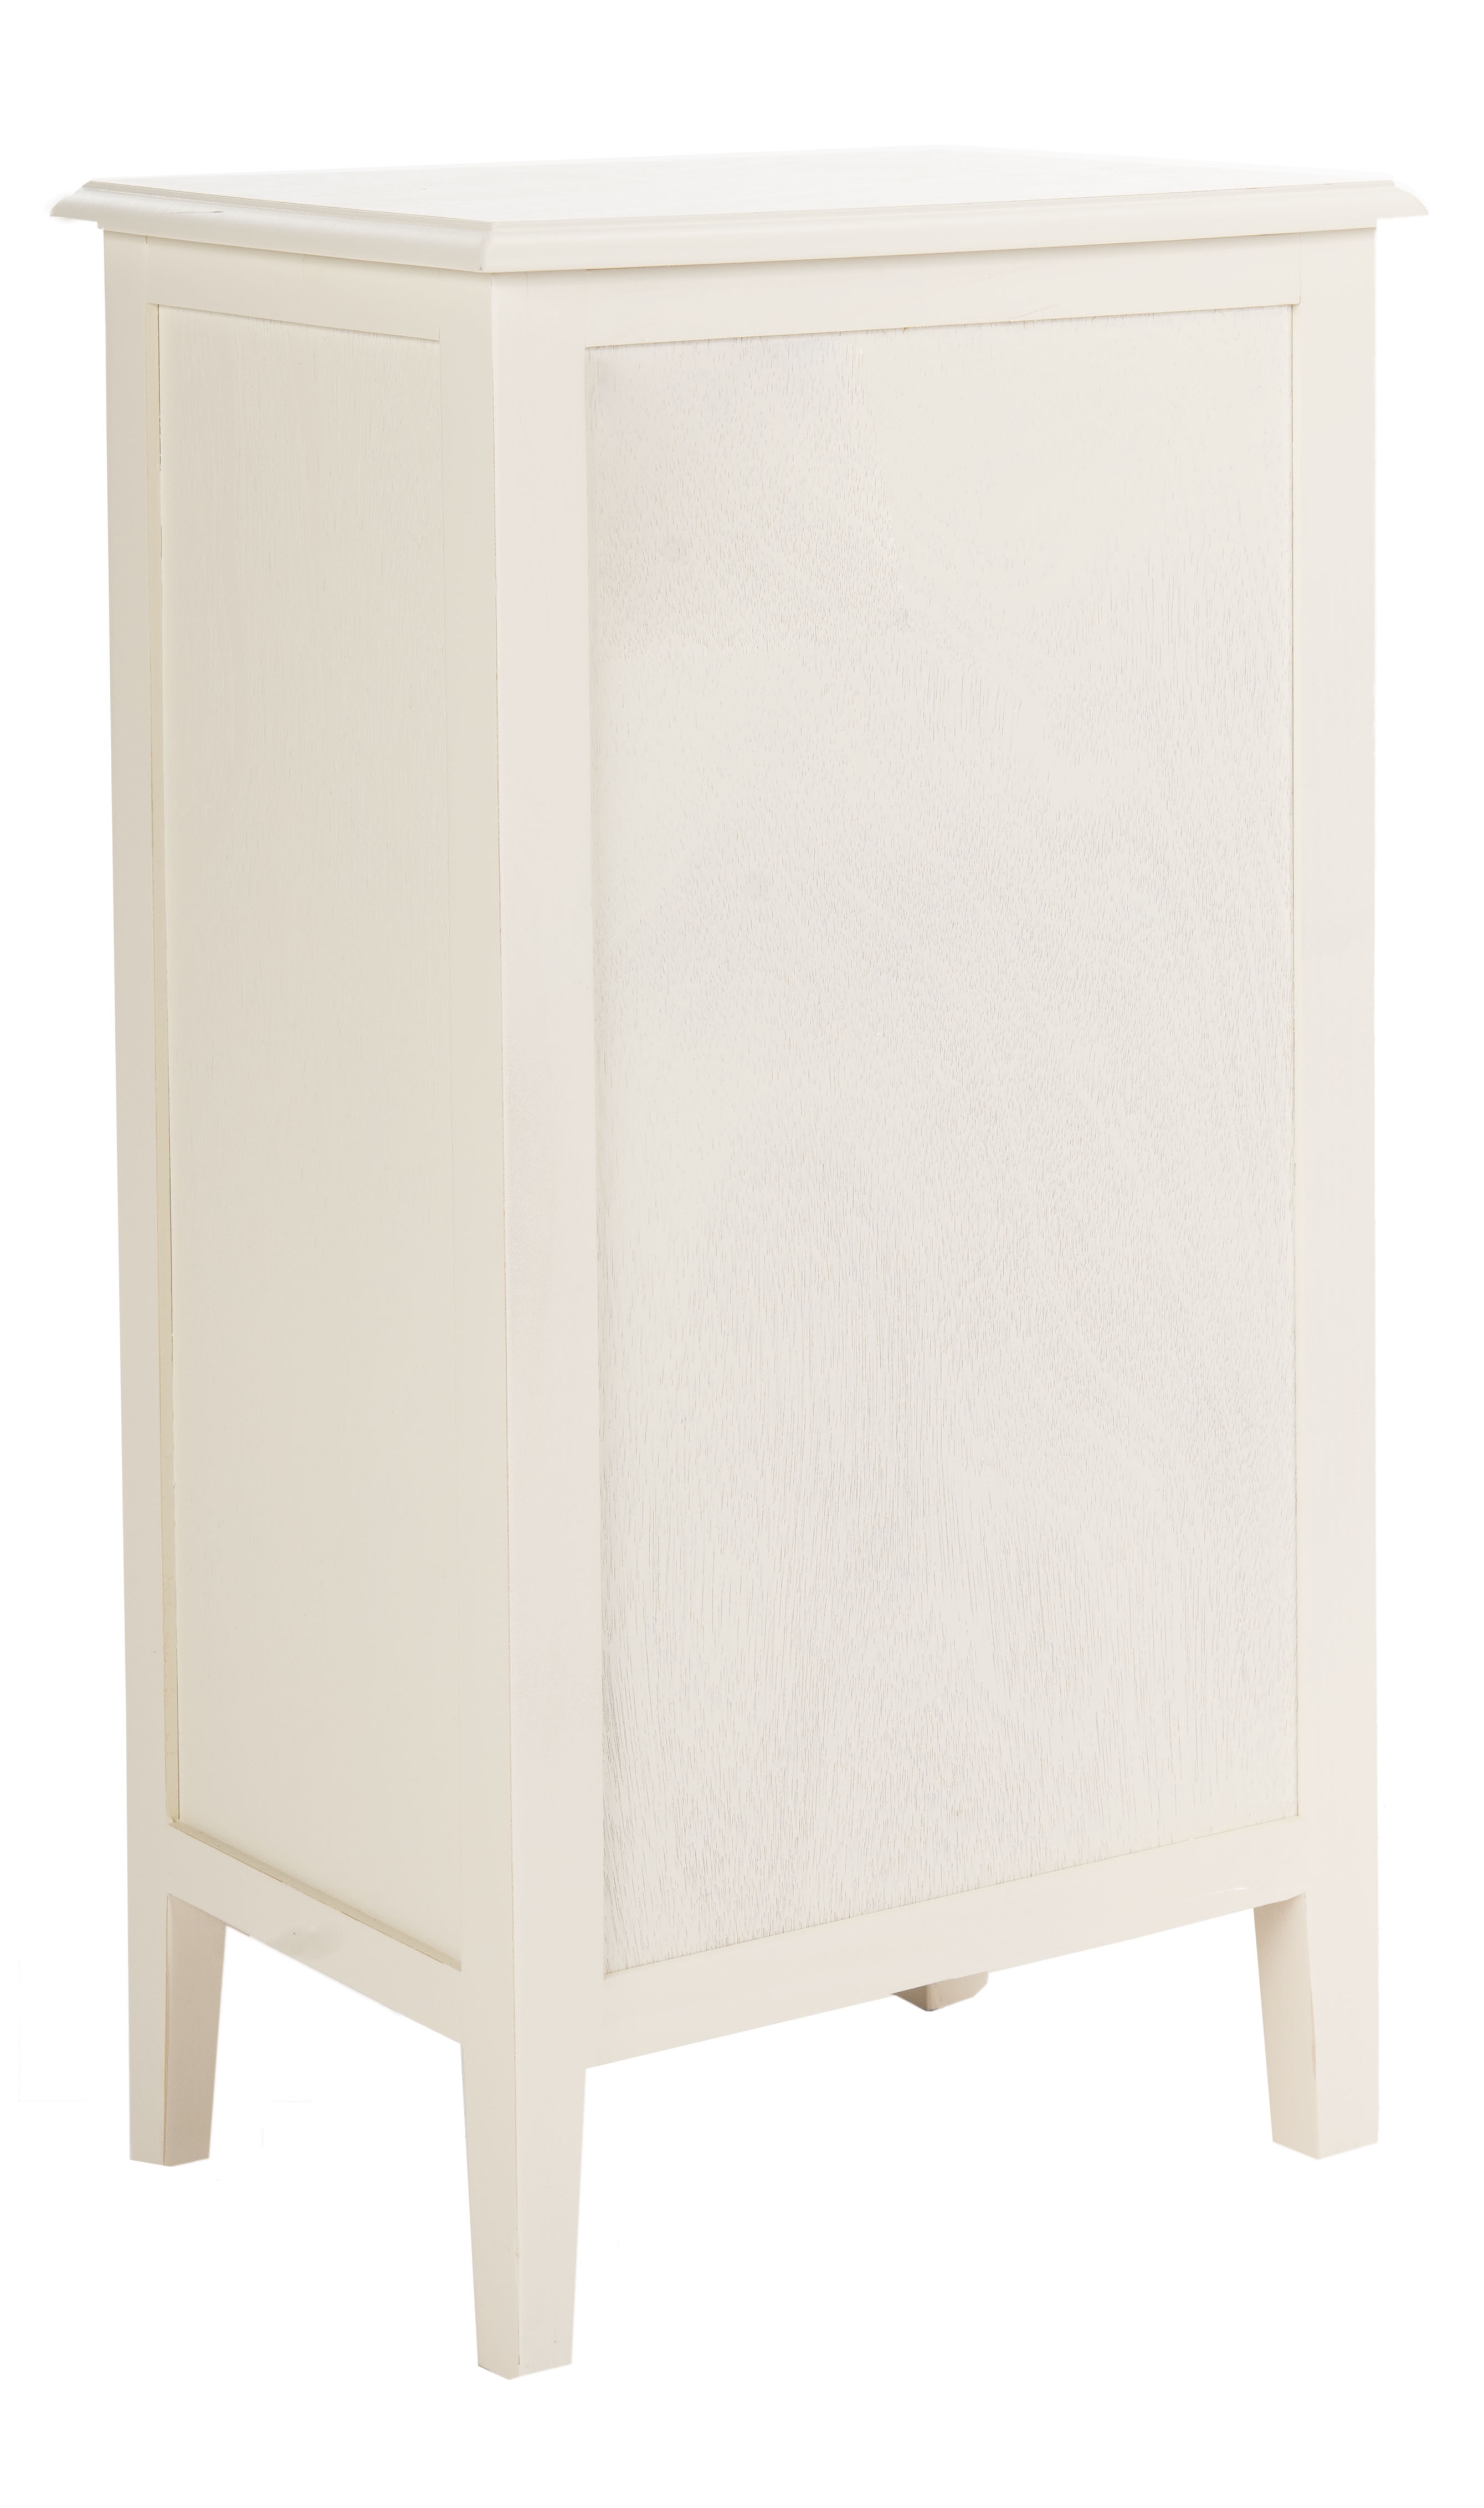 Everly Drawer Side Table - Distressed White - Arlo Home - Image 1